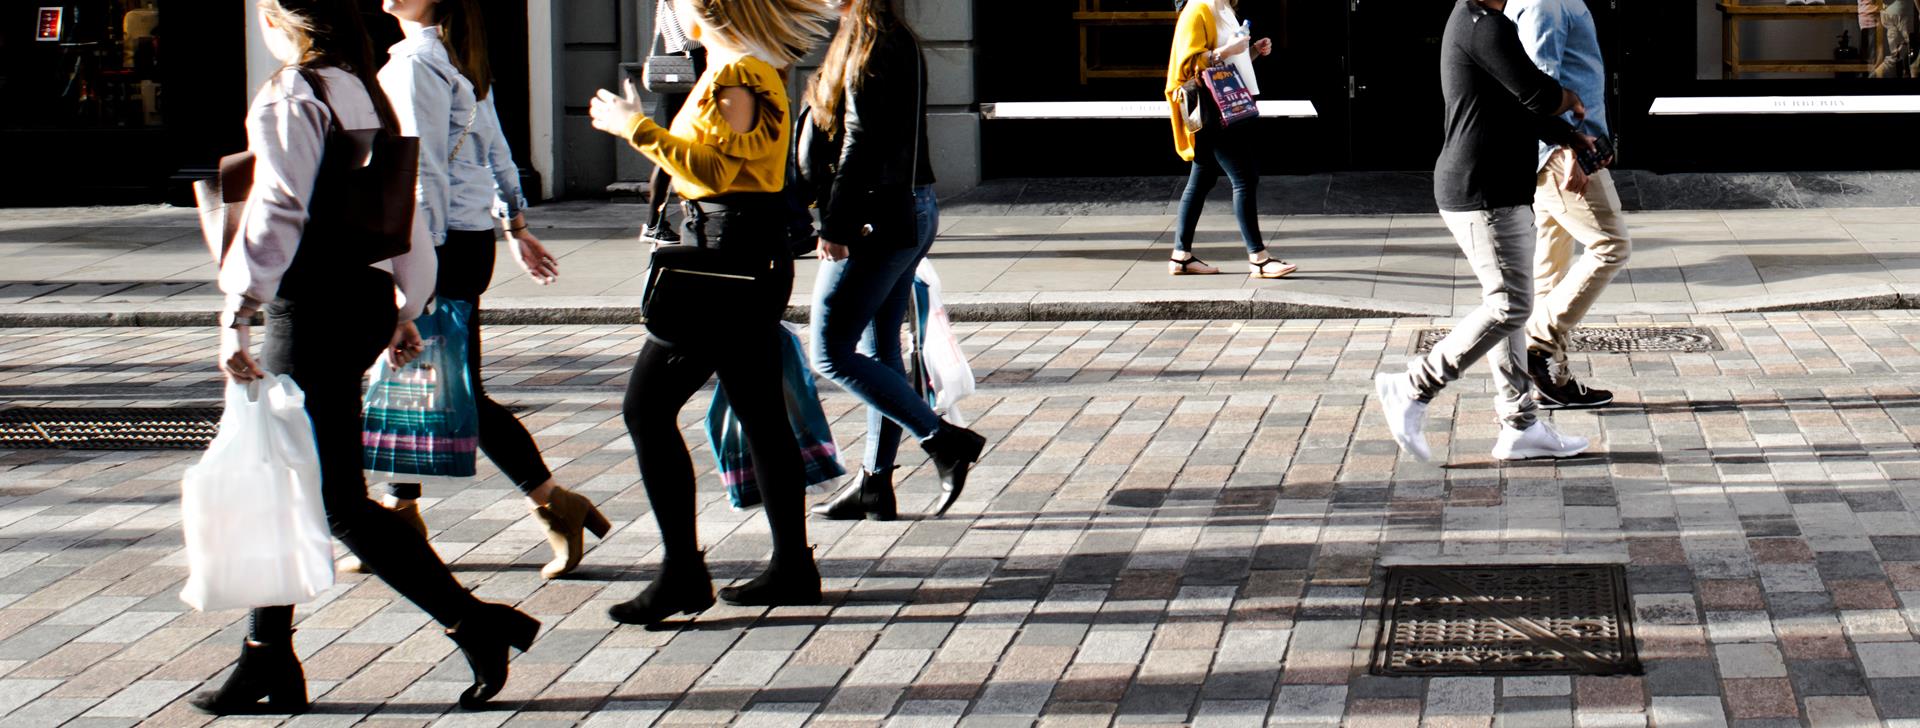 'High street not dying - it's evolving'